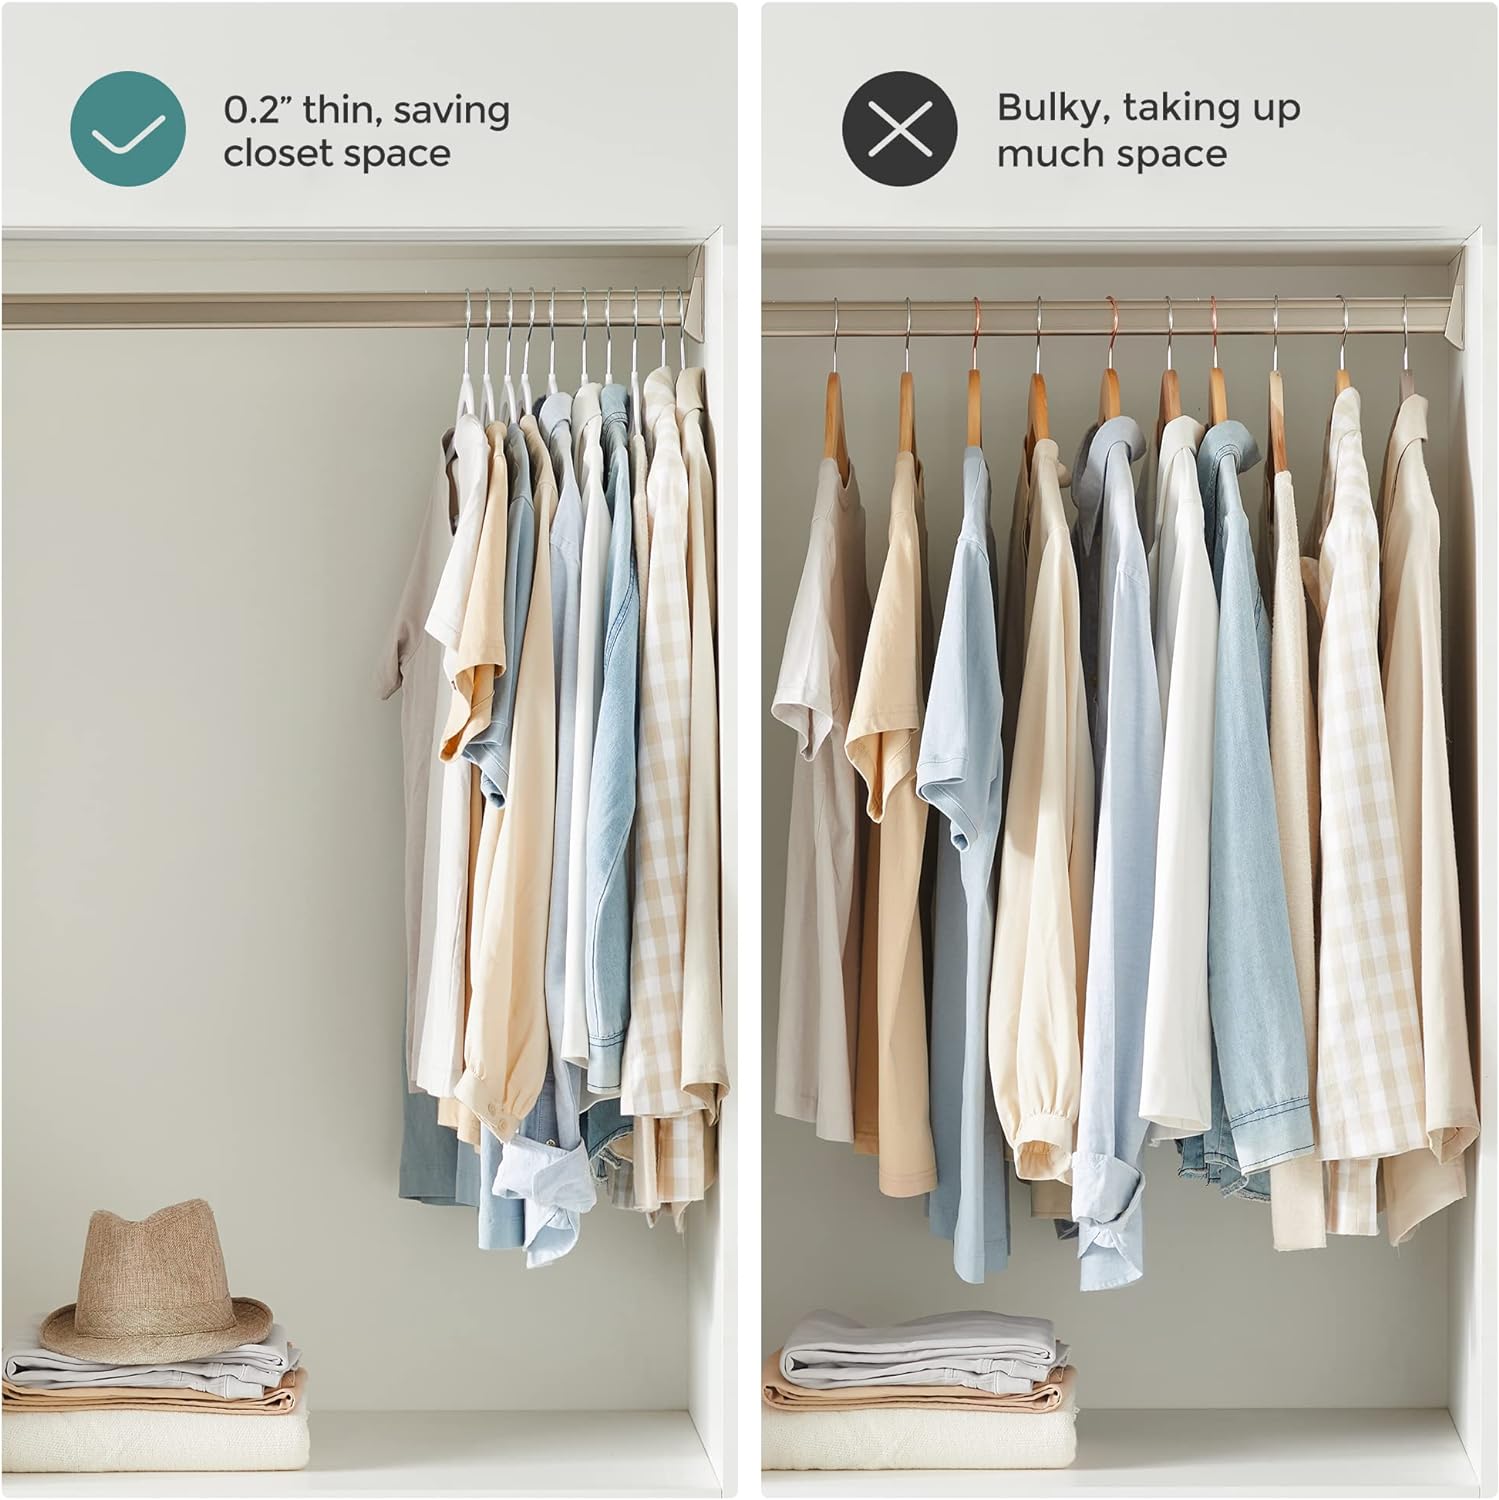 https://bigbigmart.com/wp-content/uploads/2023/12/SONGMICS-Clothes-Hangers-Pack-of-50-Plastic-Coat-Hangers-Non-Slip-Space-Saving-0.2-Inches-Thick-17.7-Inches-Long-360%C2%B0-Swivel-Hook-White-and-Dark-Gray-UCRP050W506.jpg